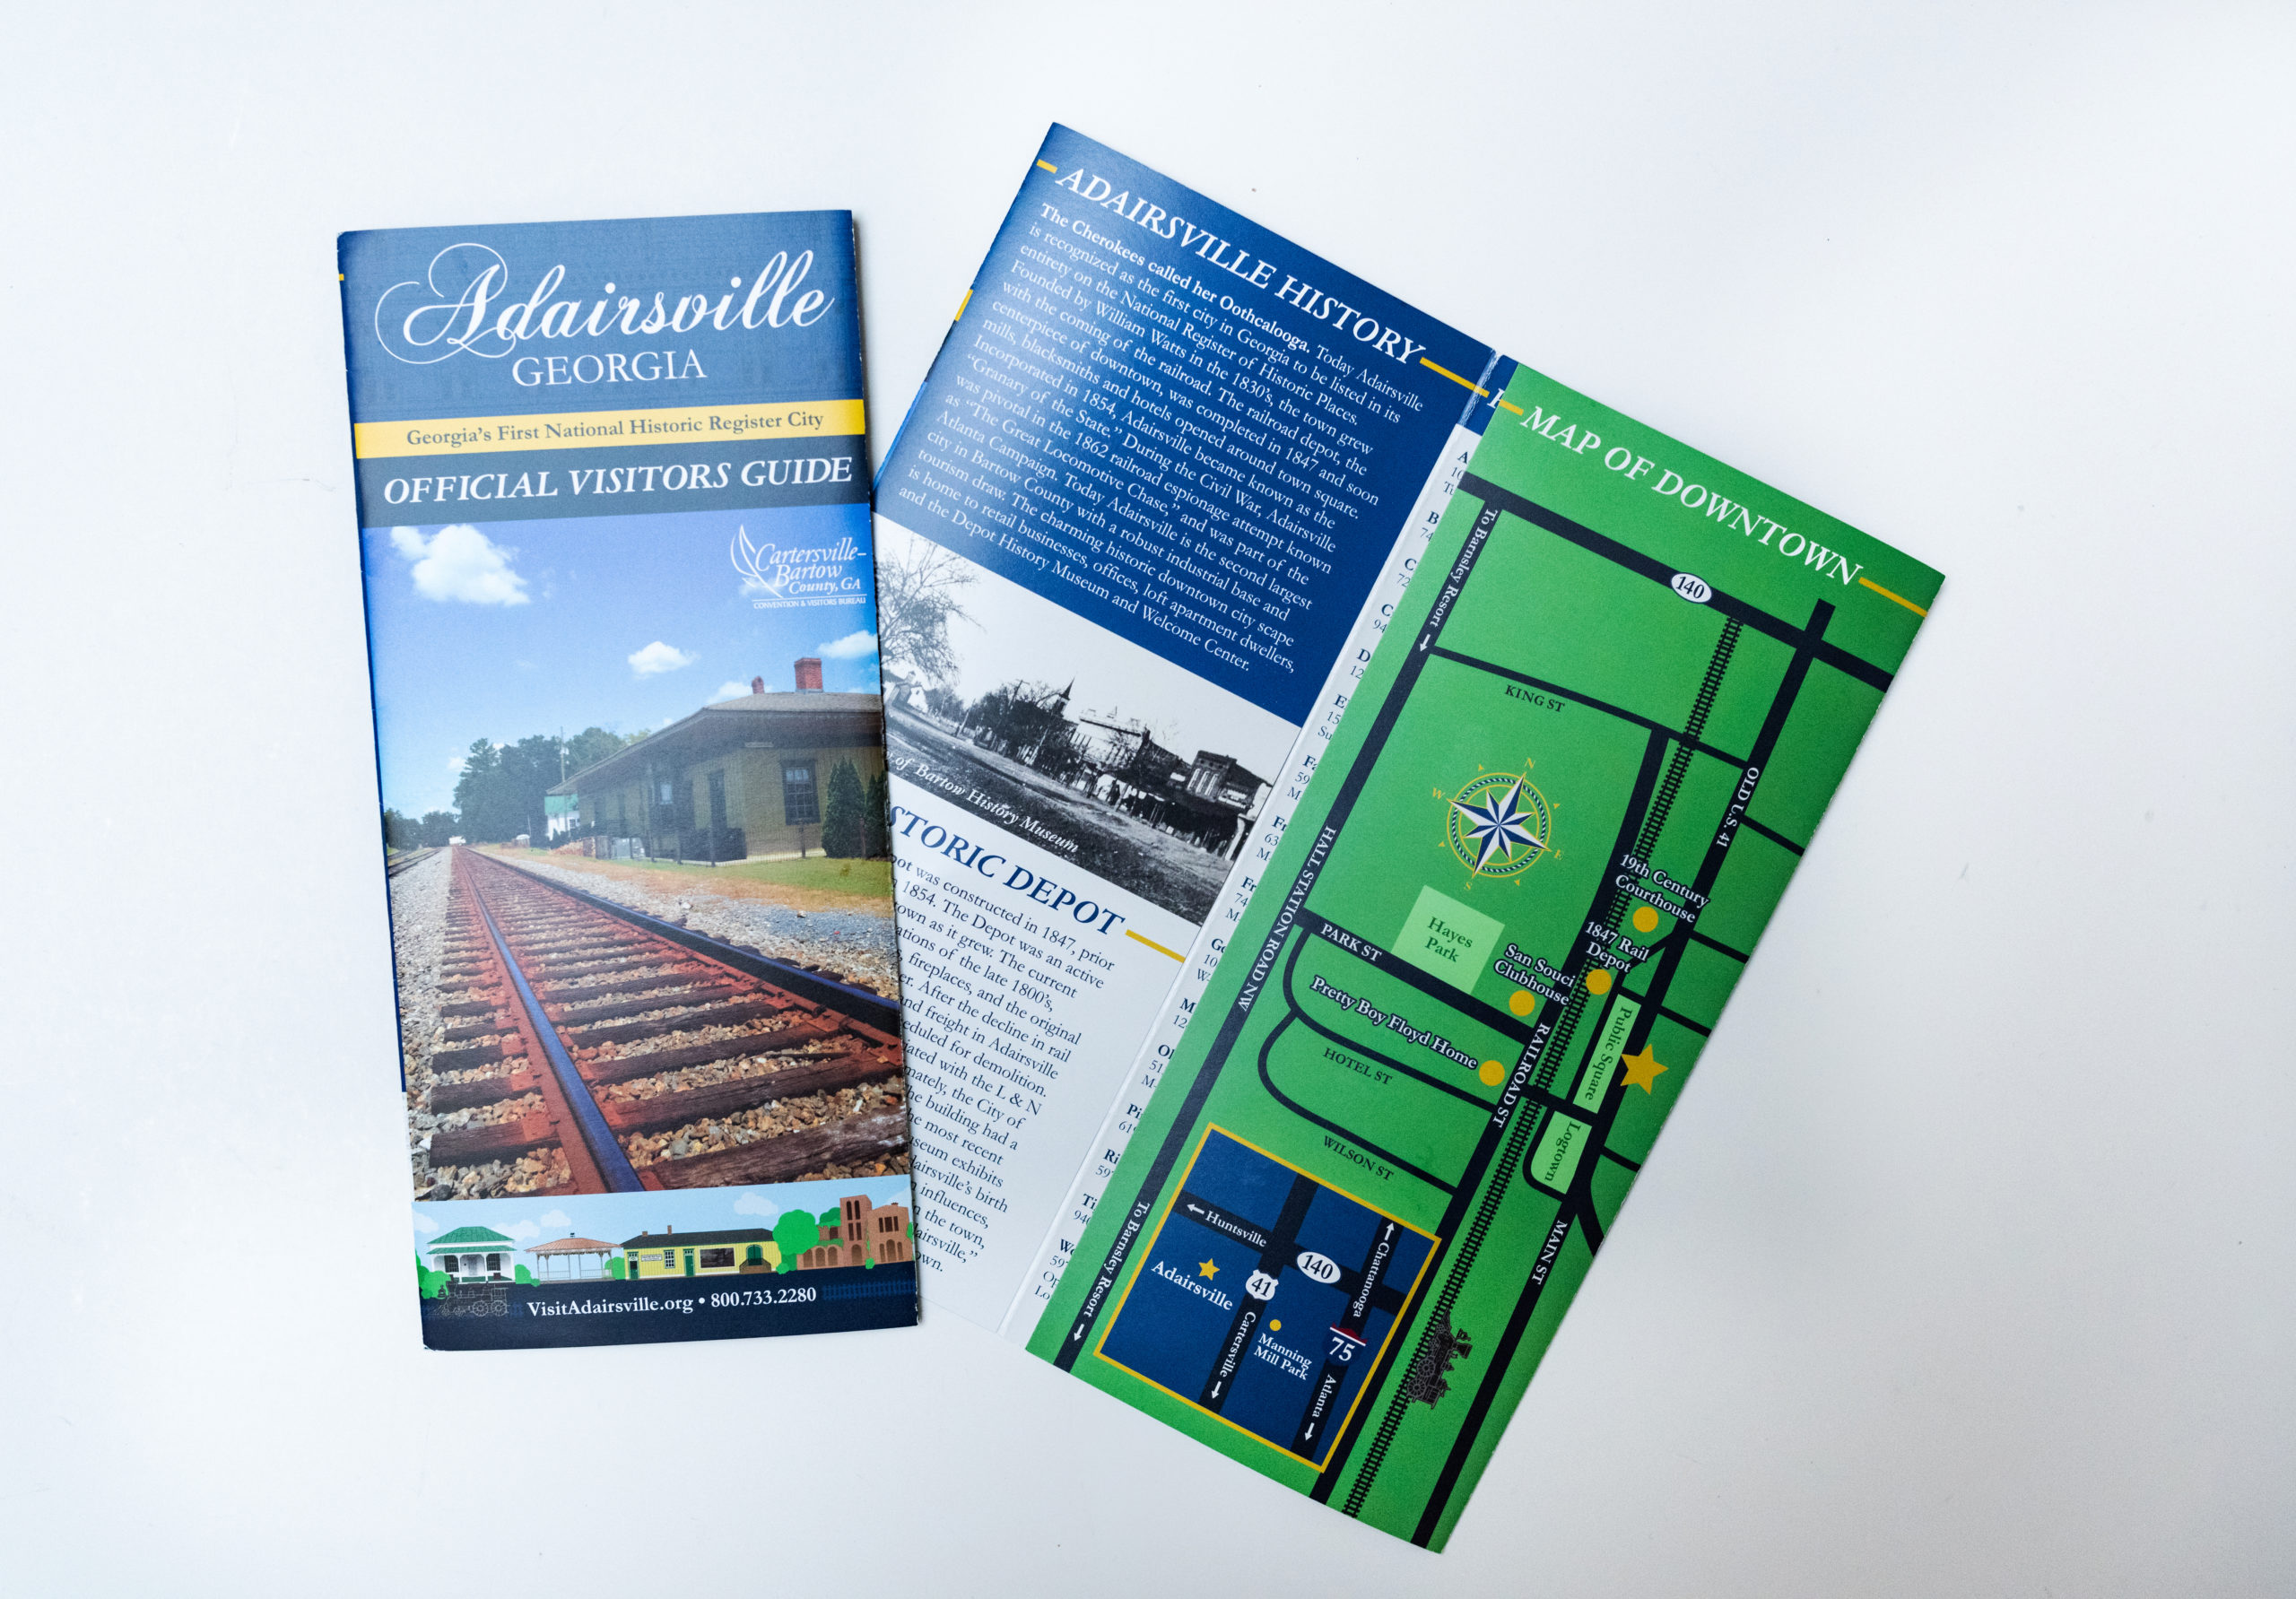 Adairsville, Georgia visitor's guide brochure with map